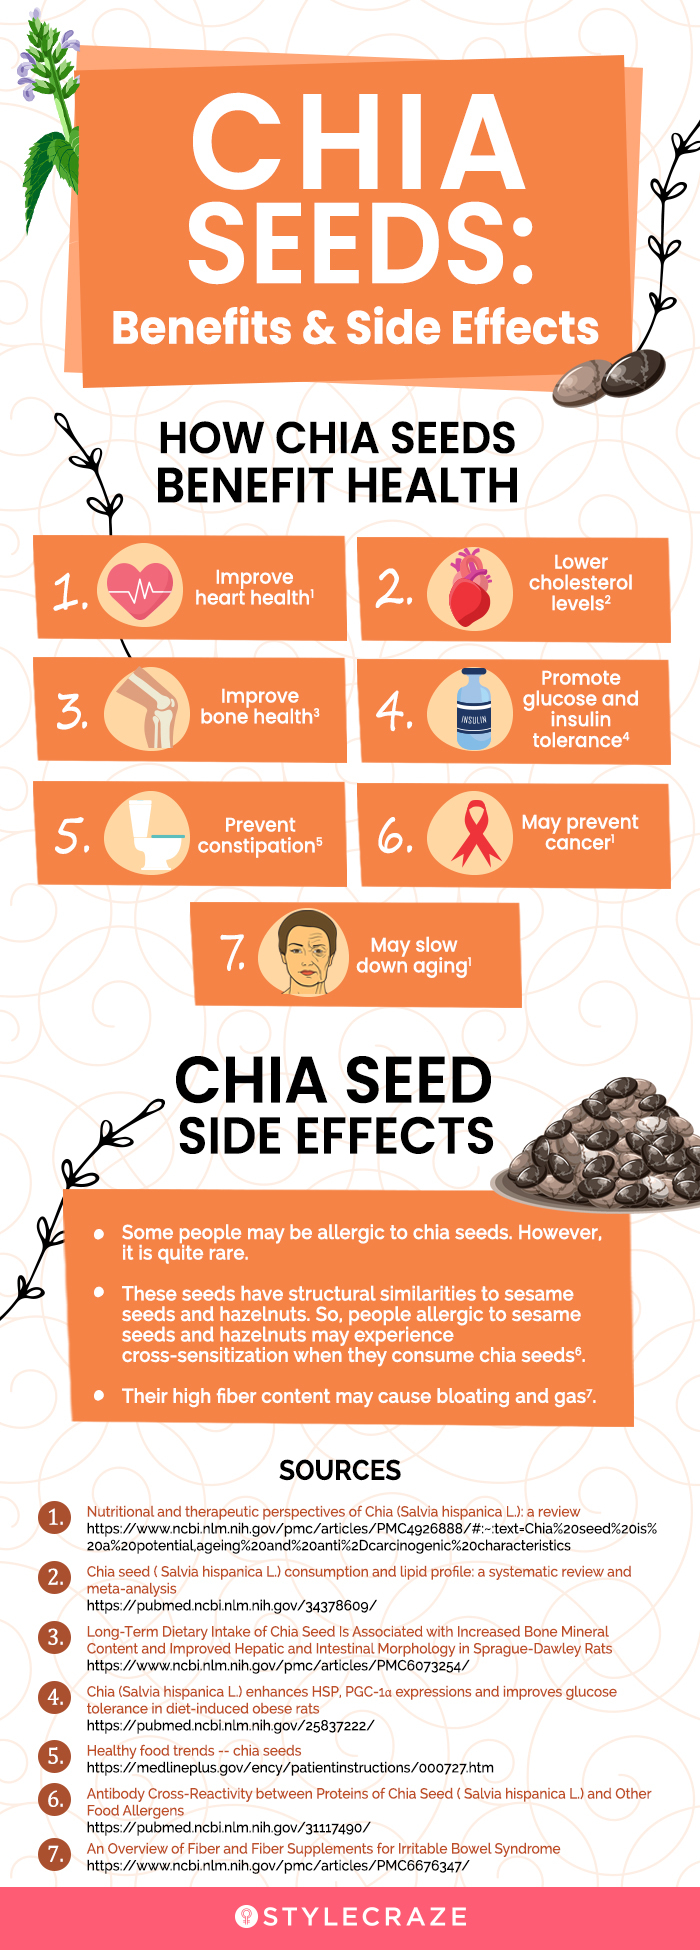 health benefits of chia seeds (infographic)